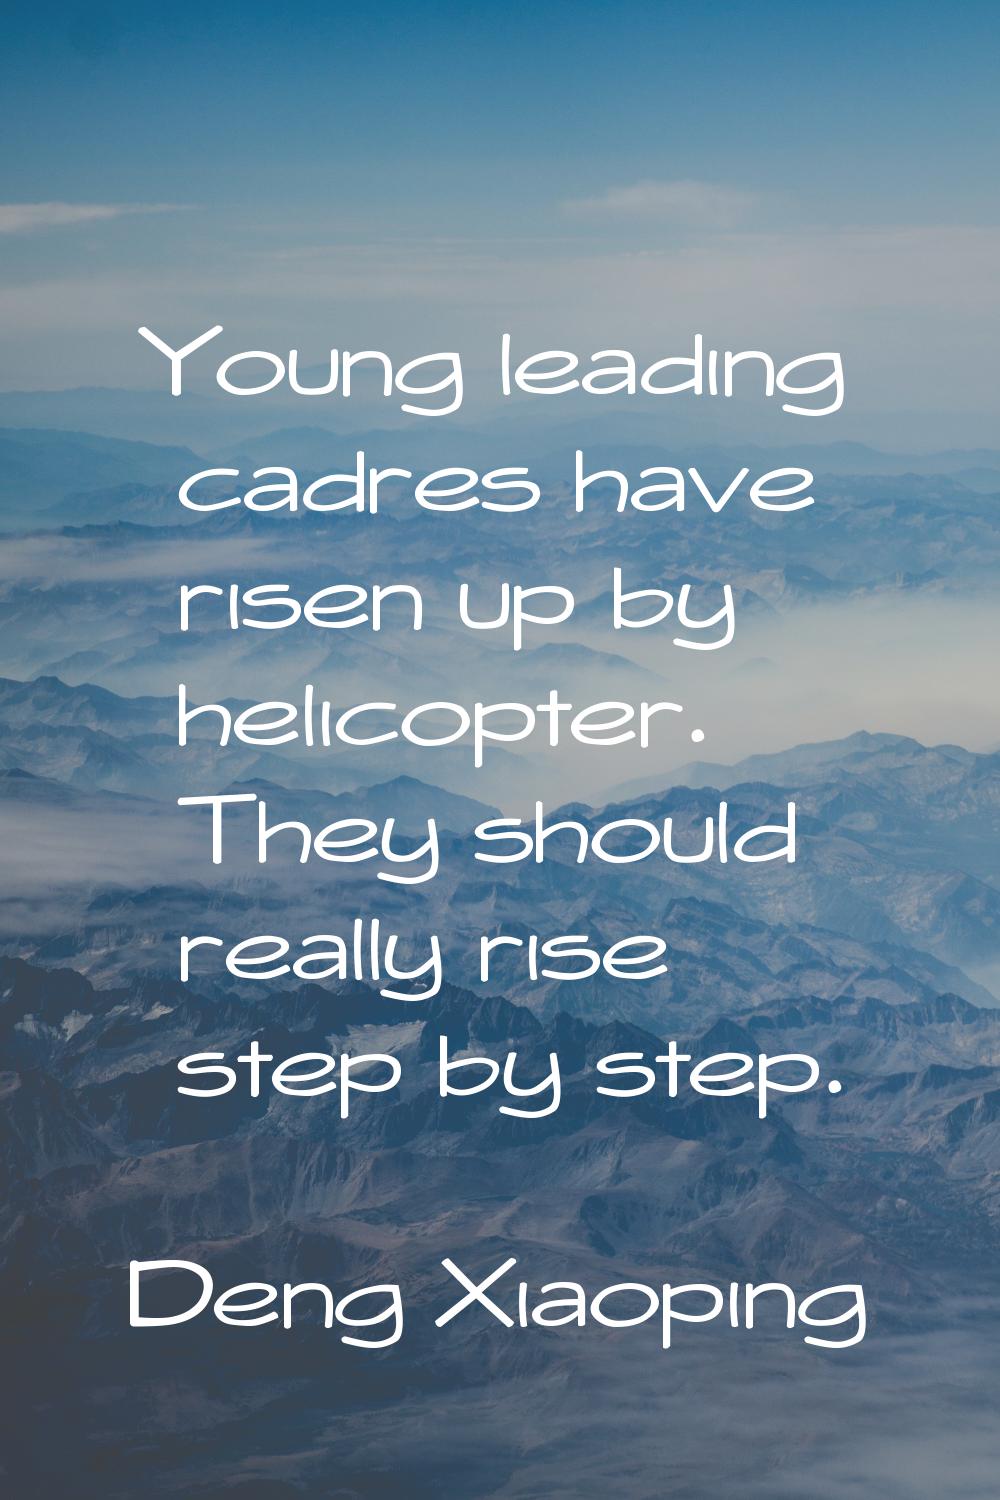 Young leading cadres have risen up by helicopter. They should really rise step by step.